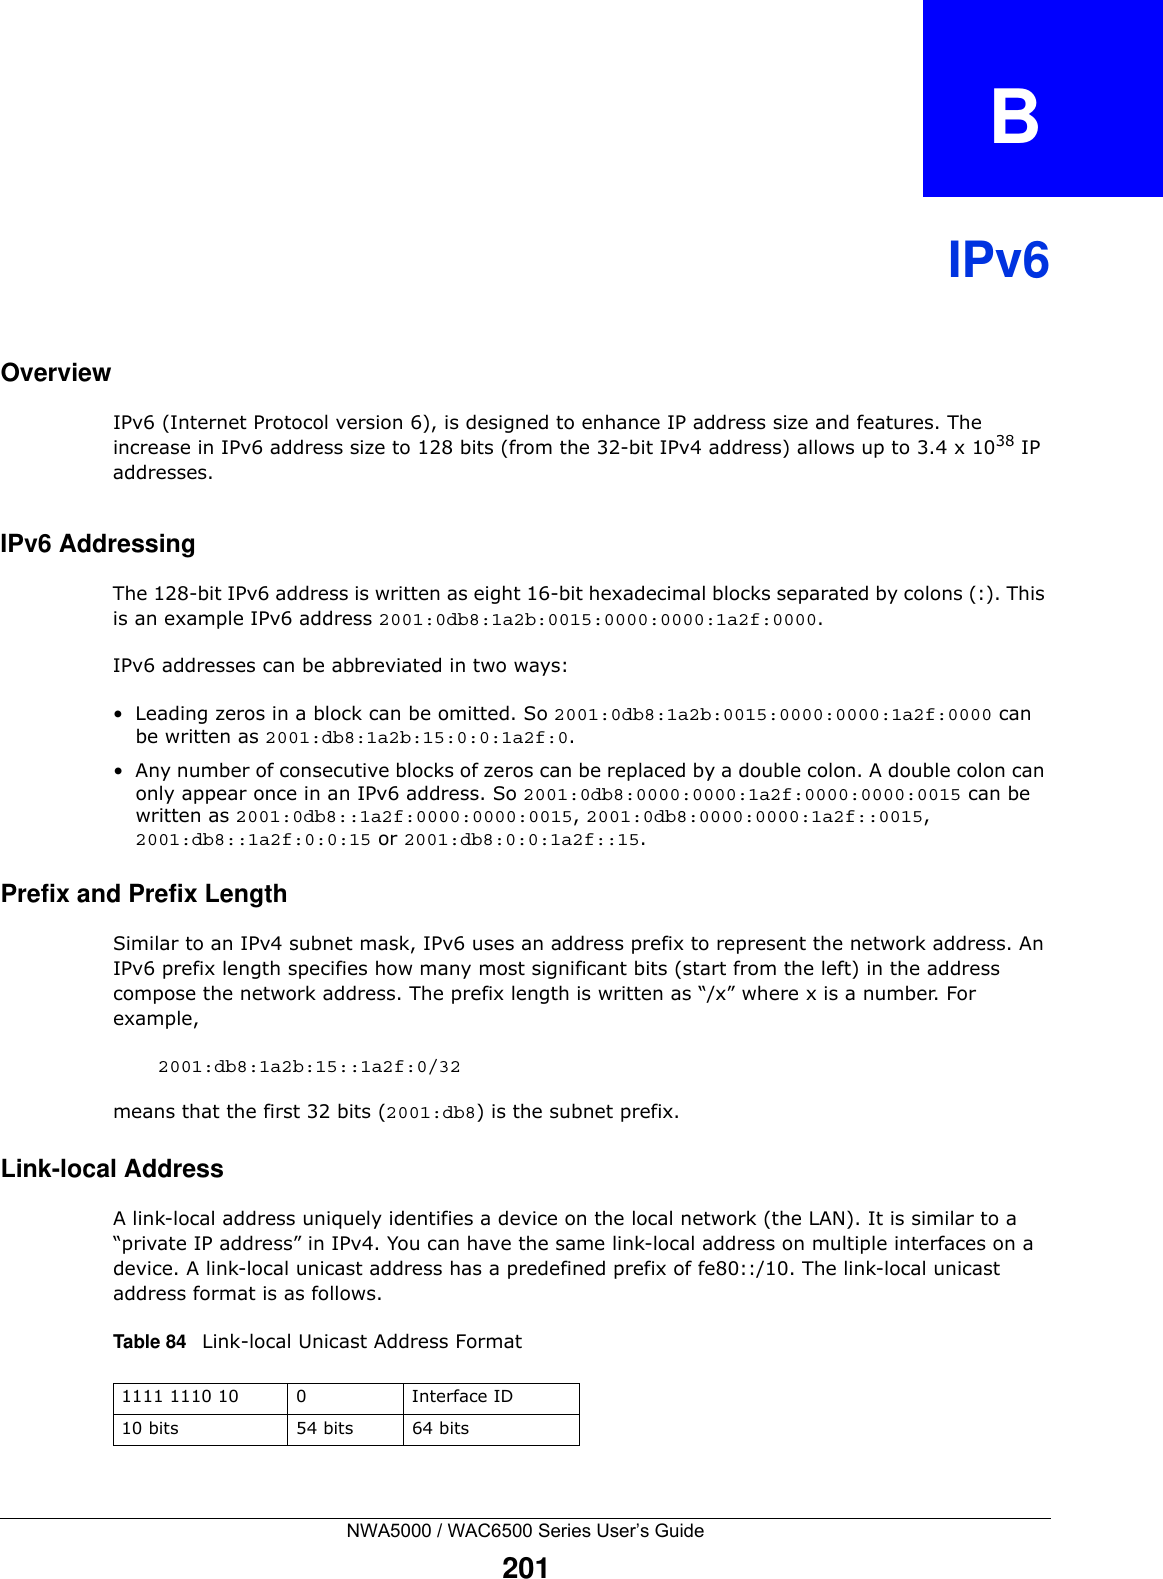 NWA5000 / WAC6500 Series User’s Guide201APPENDIX   BIPv6OverviewIPv6 (Internet Protocol version 6), is designed to enhance IP address size and features. The increase in IPv6 address size to 128 bits (from the 32-bit IPv4 address) allows up to 3.4 x 1038 IP addresses. IPv6 AddressingThe 128-bit IPv6 address is written as eight 16-bit hexadecimal blocks separated by colons (:). This is an example IPv6 address 2001:0db8:1a2b:0015:0000:0000:1a2f:0000. IPv6 addresses can be abbreviated in two ways:• Leading zeros in a block can be omitted. So 2001:0db8:1a2b:0015:0000:0000:1a2f:0000 can be written as 2001:db8:1a2b:15:0:0:1a2f:0. • Any number of consecutive blocks of zeros can be replaced by a double colon. A double colon can only appear once in an IPv6 address. So 2001:0db8:0000:0000:1a2f:0000:0000:0015 can be written as 2001:0db8::1a2f:0000:0000:0015, 2001:0db8:0000:0000:1a2f::0015, 2001:db8::1a2f:0:0:15 or 2001:db8:0:0:1a2f::15.Prefix and Prefix LengthSimilar to an IPv4 subnet mask, IPv6 uses an address prefix to represent the network address. An IPv6 prefix length specifies how many most significant bits (start from the left) in the address compose the network address. The prefix length is written as “/x” where x is a number. For example, 2001:db8:1a2b:15::1a2f:0/32means that the first 32 bits (2001:db8) is the subnet prefix. Link-local AddressA link-local address uniquely identifies a device on the local network (the LAN). It is similar to a “private IP address” in IPv4. You can have the same link-local address on multiple interfaces on a device. A link-local unicast address has a predefined prefix of fe80::/10. The link-local unicast address format is as follows.Table 84   Link-local Unicast Address Format1111 1110 10 0 Interface ID10 bits 54 bits 64 bits